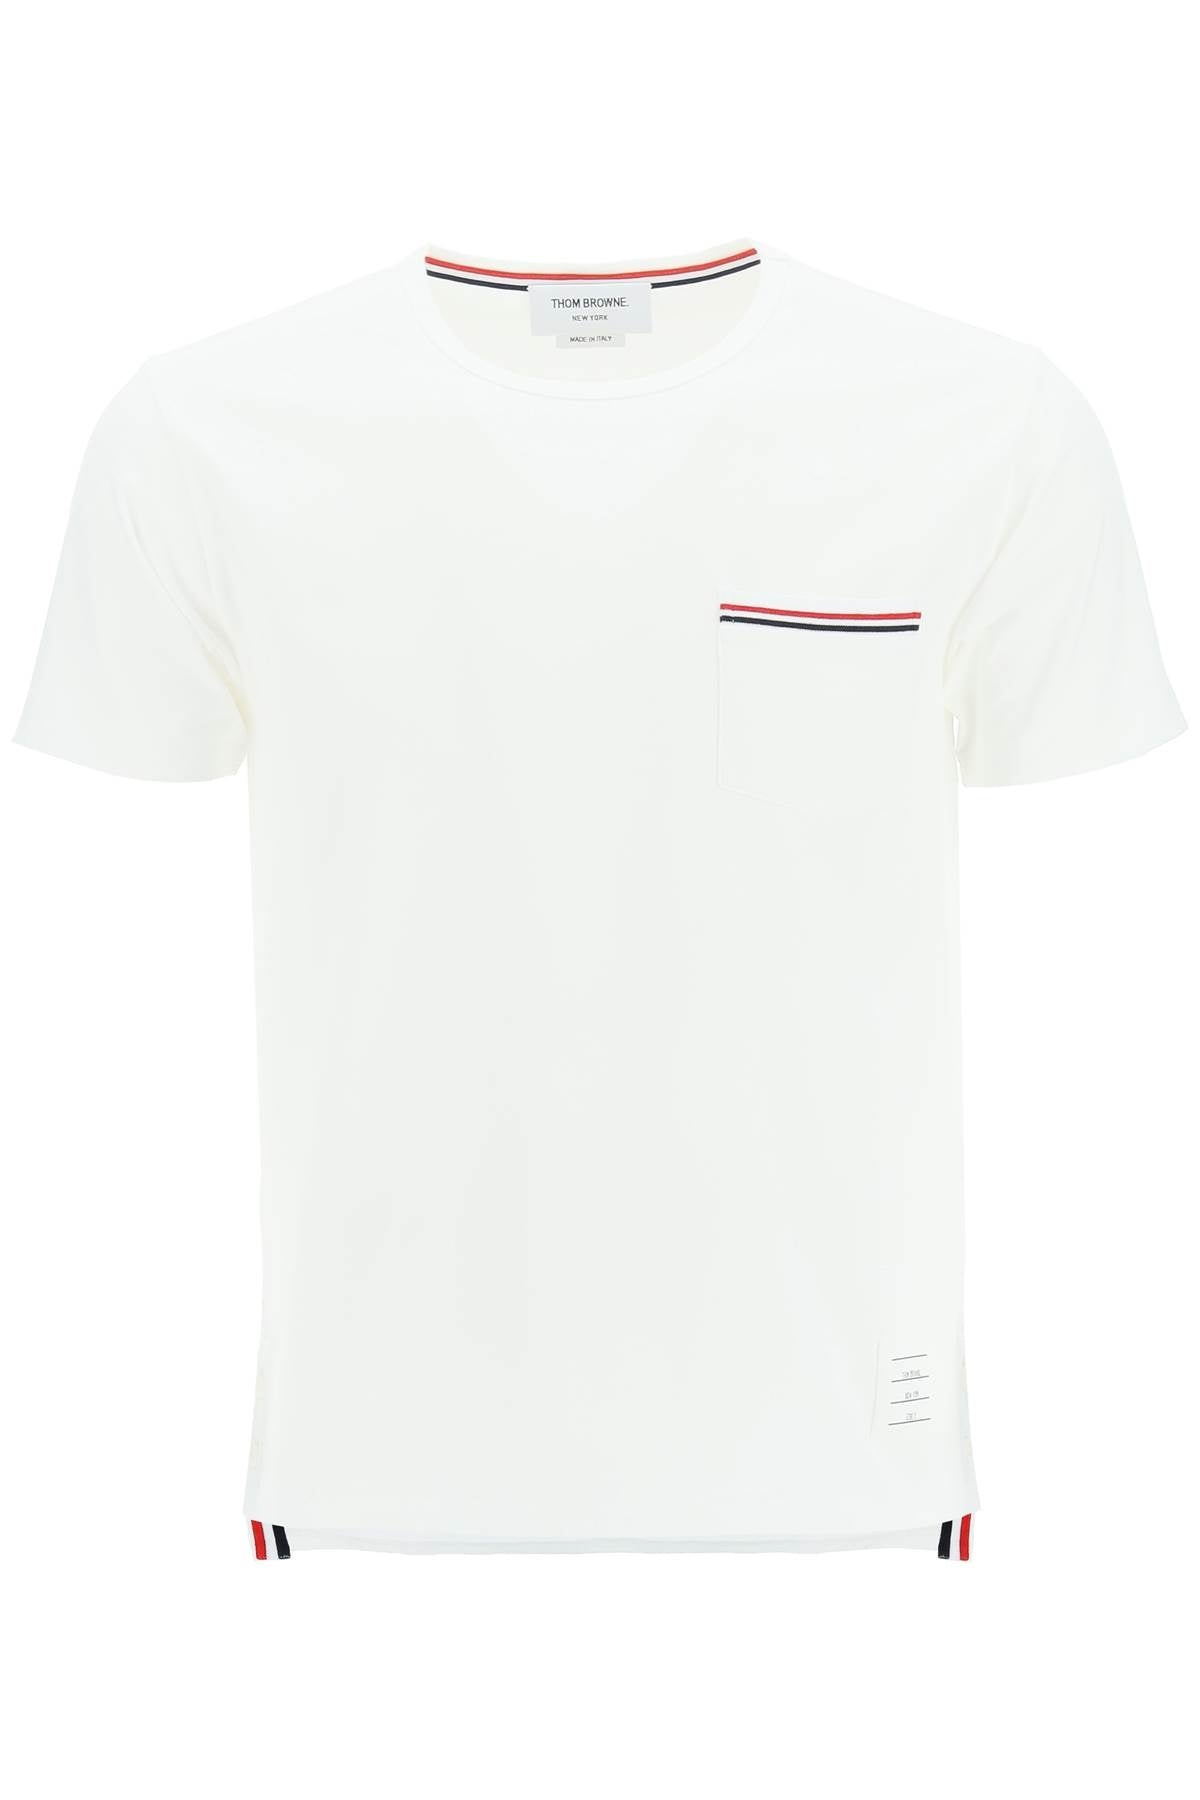 Thom Browne T-Shirt With Tricolor Pocket Men - 1